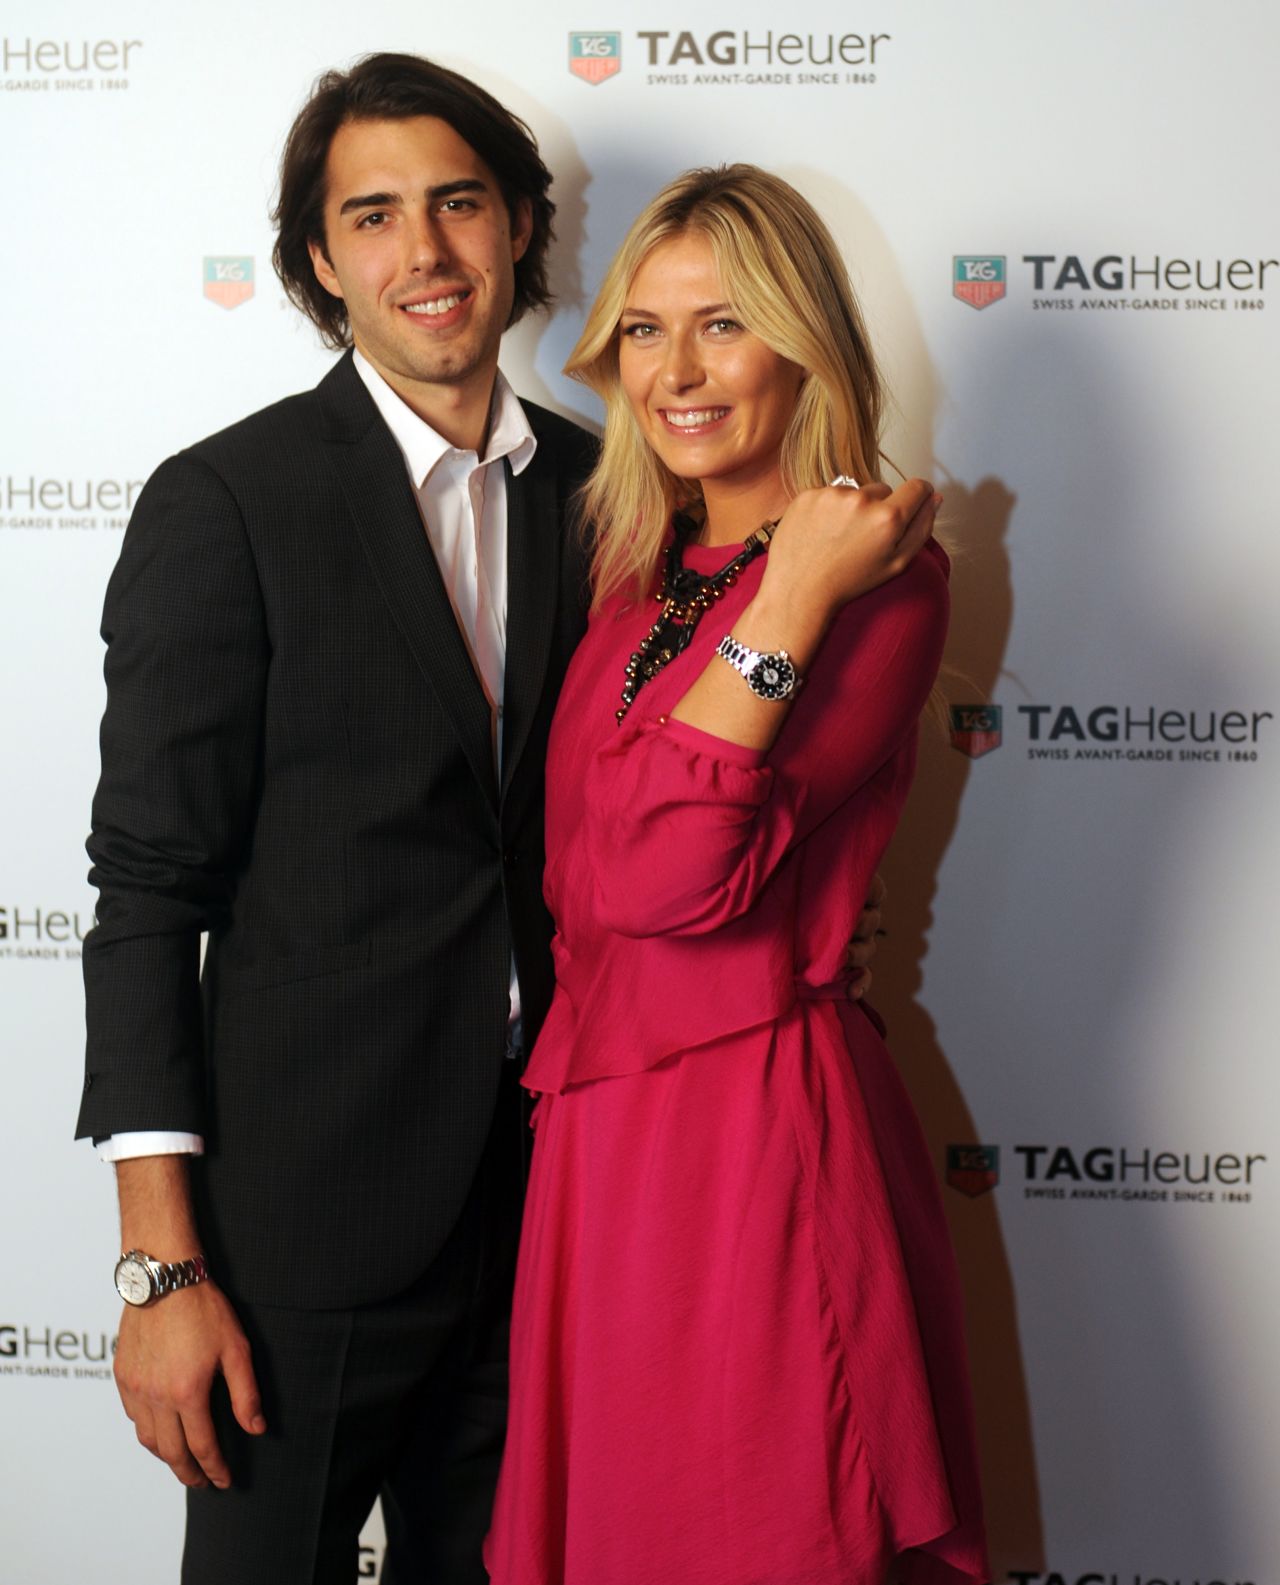 The romance between Russian tennis ace Sharapova and Slovenian basketballer Vujacic blossomed in 2009 before their engagement was announced in October the following year. The former L.A. Lakers star can often be seen courtside, cheering the three-time grand slam winner on at major tournaments. He now plys his trade in Turkey.